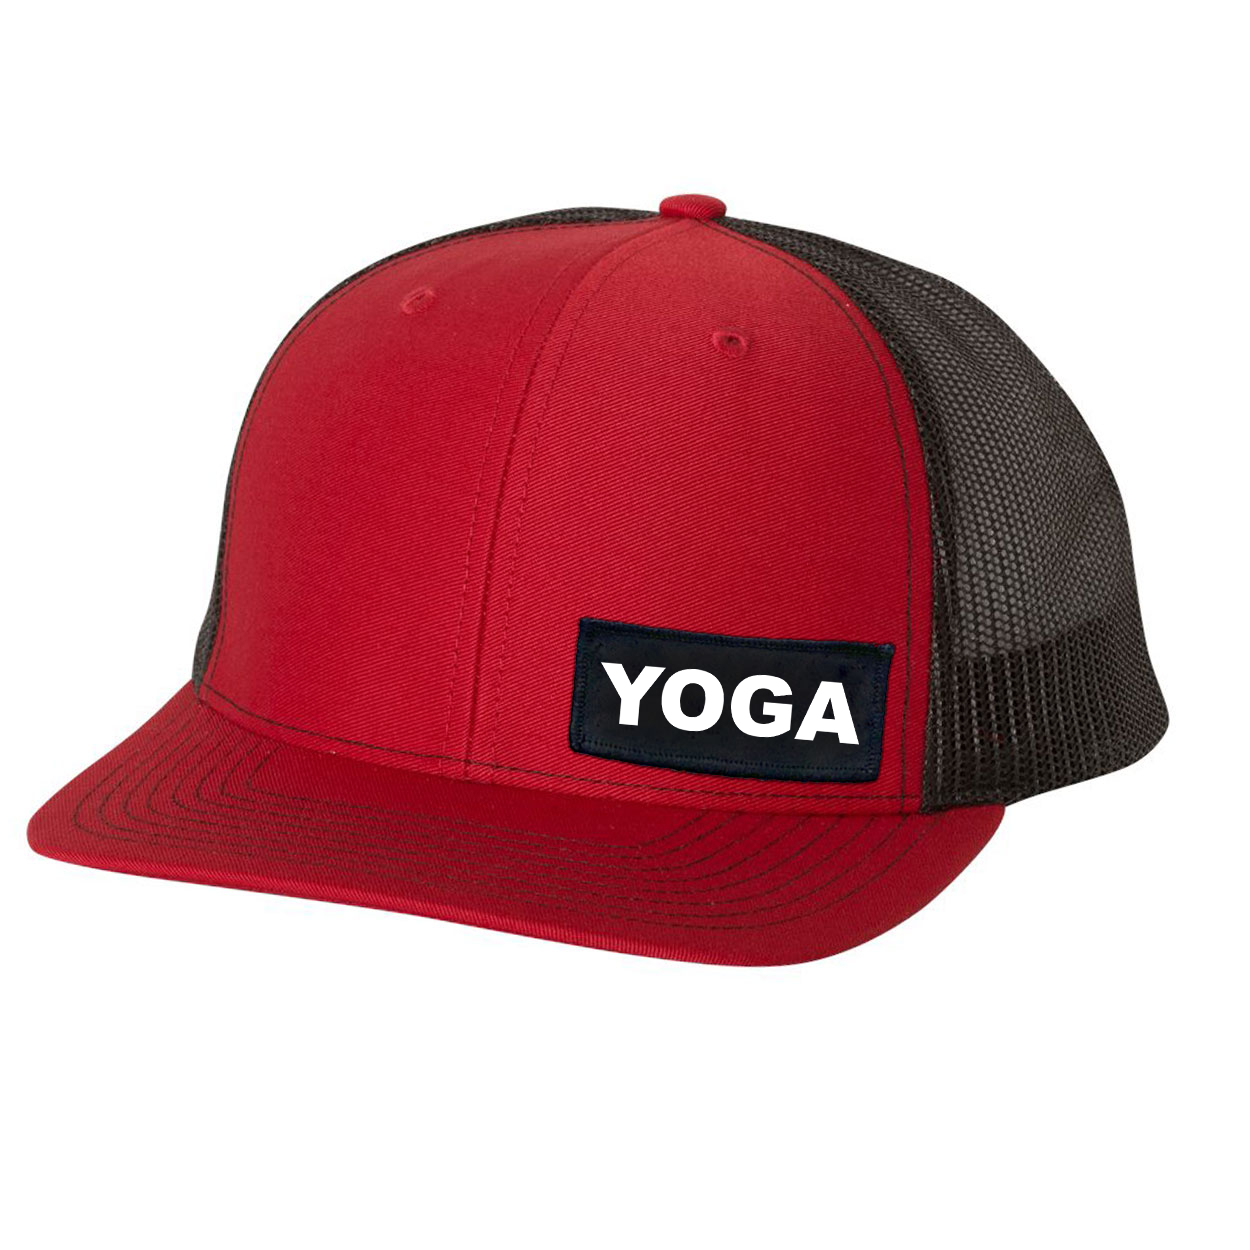 Yoga Brand Logo Night Out Woven Patch Snapback Trucker Hat Red/Black